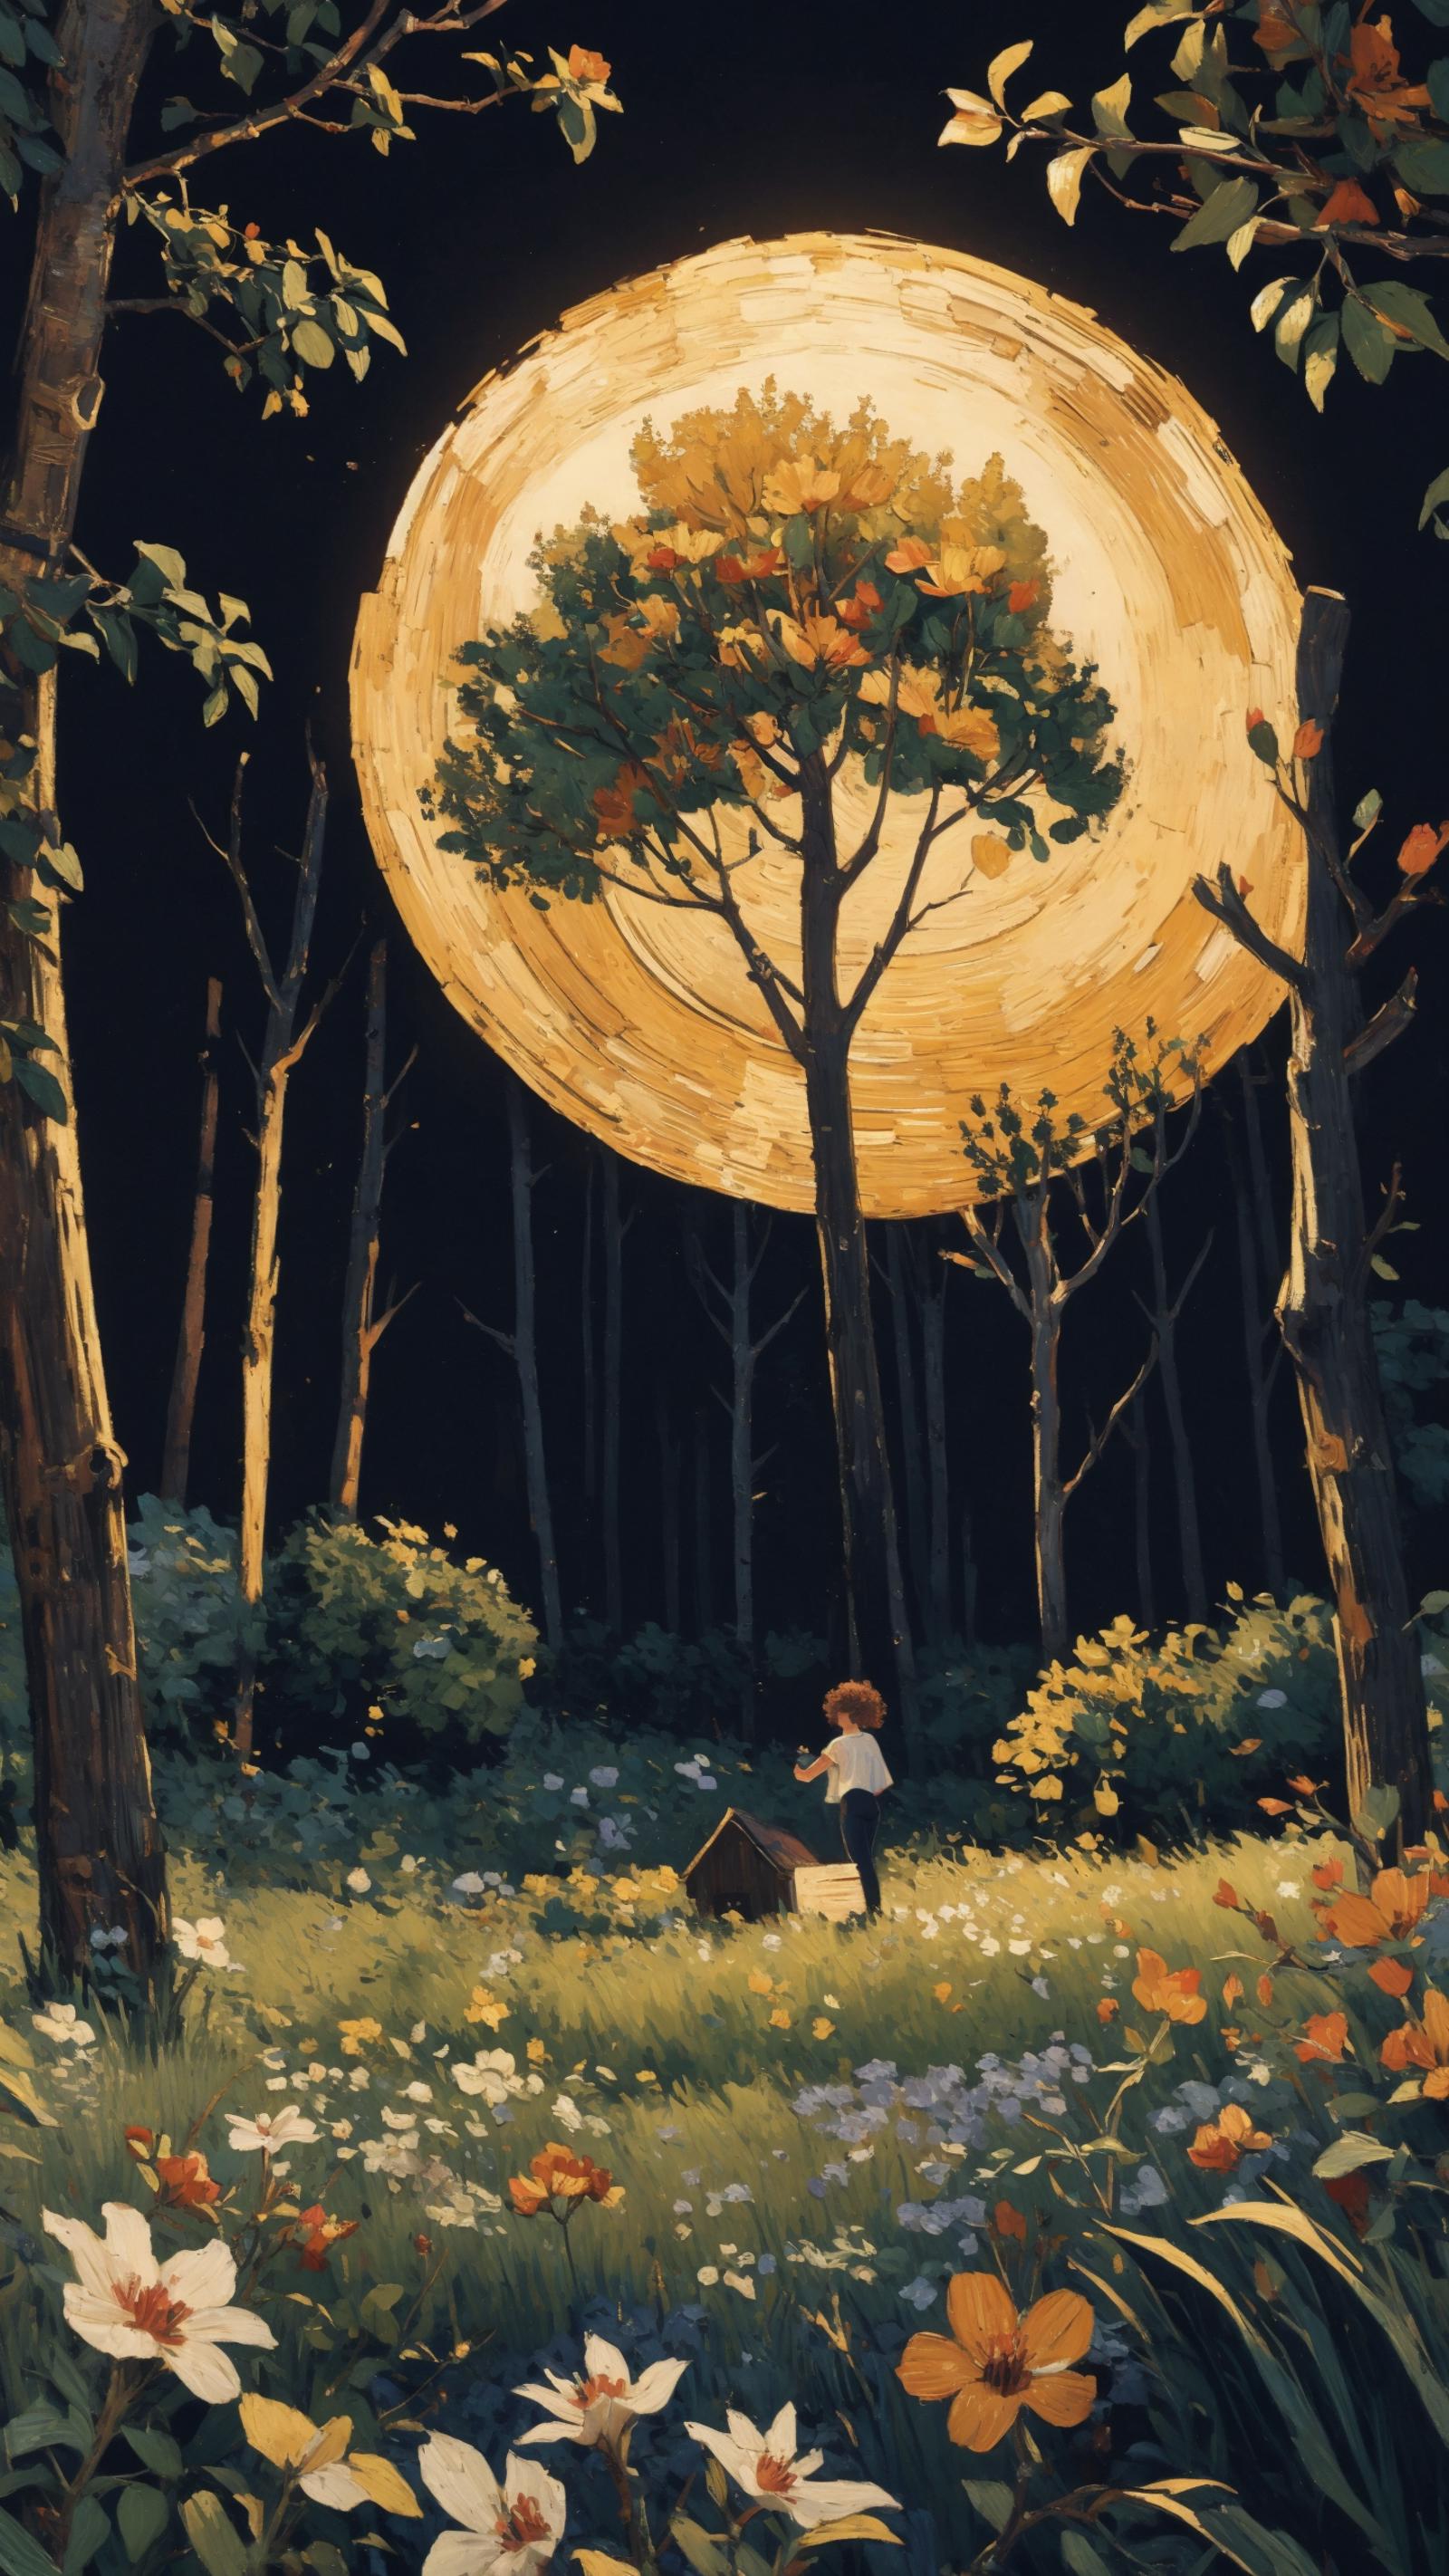 A Child Sitting Under a Tree with a Full Moon in the Background